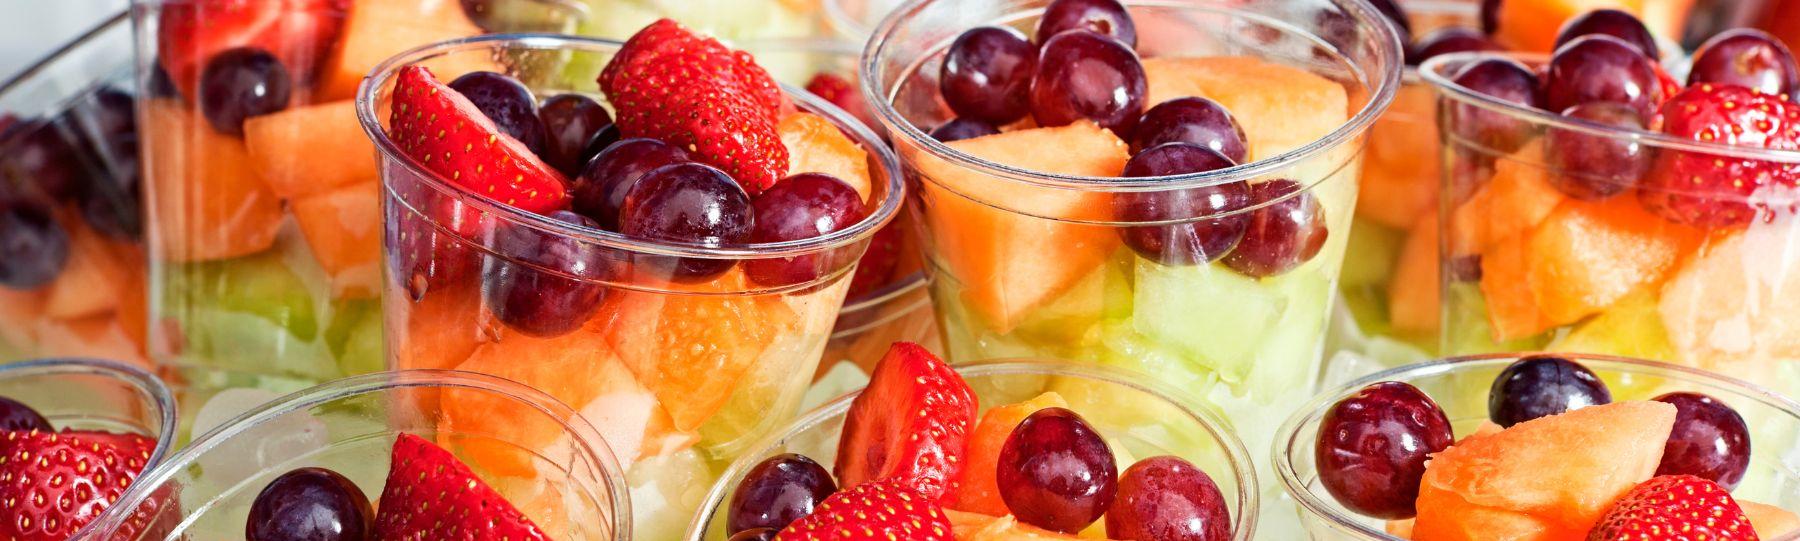 Small plastic cups filled with cut up fruit including grapes and strawberries